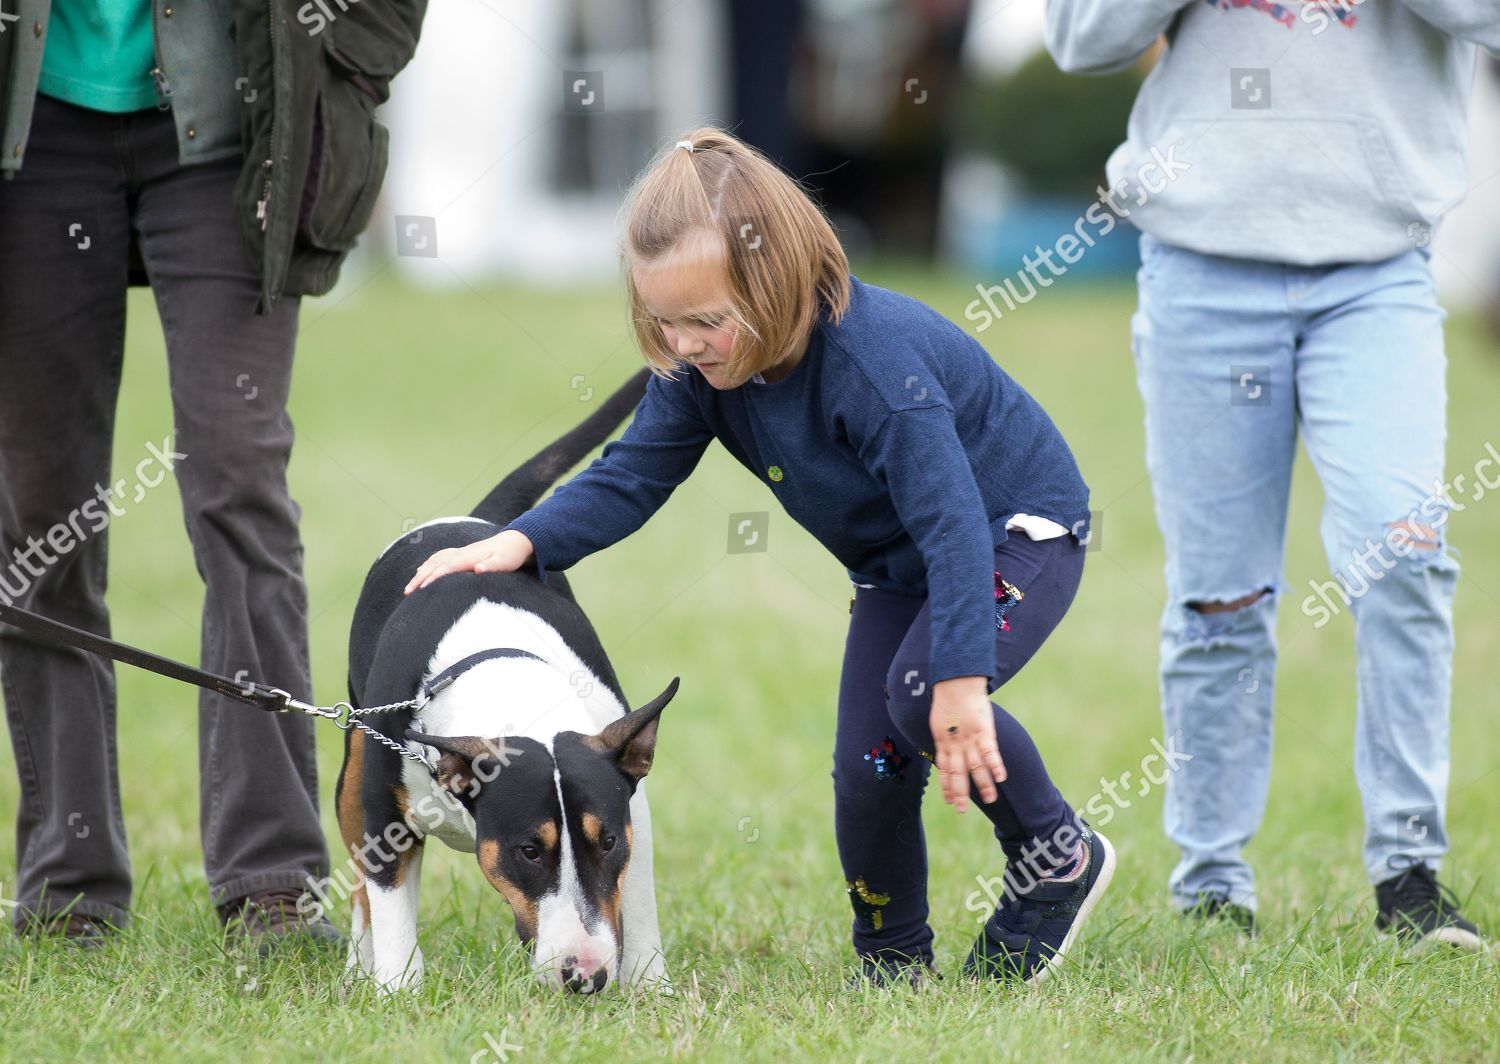 whately-manor-international-horse-trials-at-gatcombe-park-gloucestershire-uk-shutterstock-editorial-9876945y.jpg